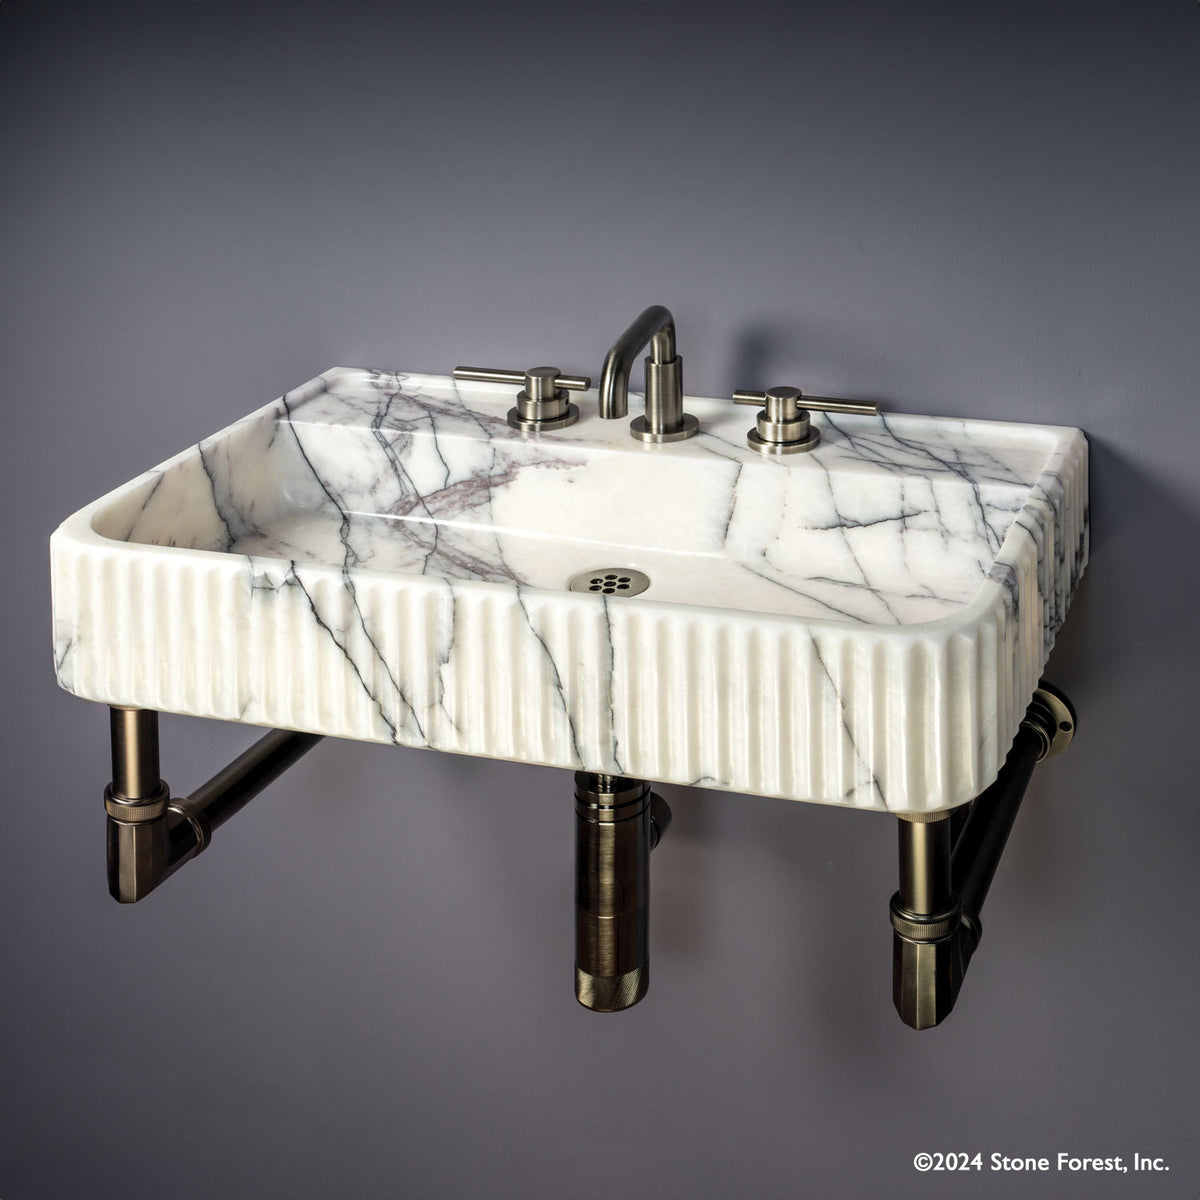 Fluted Lumbre Bath Sink carved from Viola Bianco Marble on an Elemental Facet Wall Unit in graphite image 1 of 4